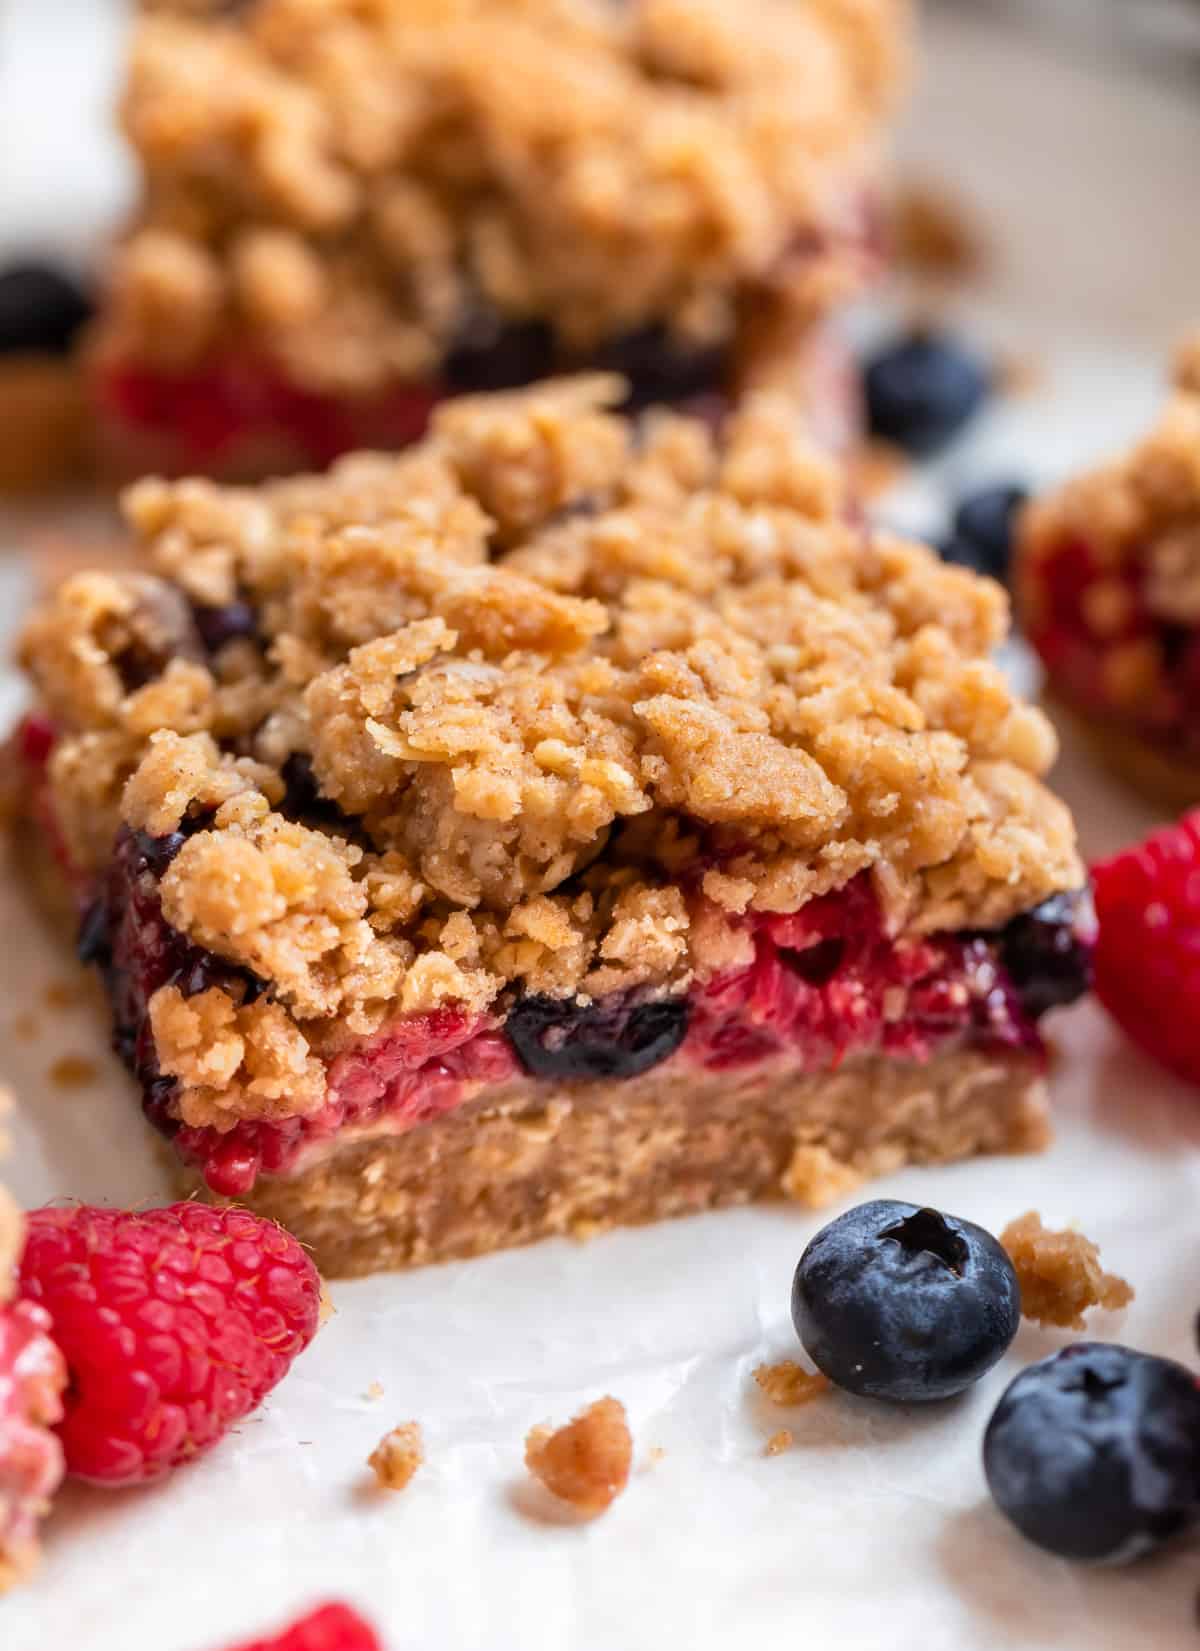 Mixed berry bar on wax paper with blueberries and raspberries surrounding.